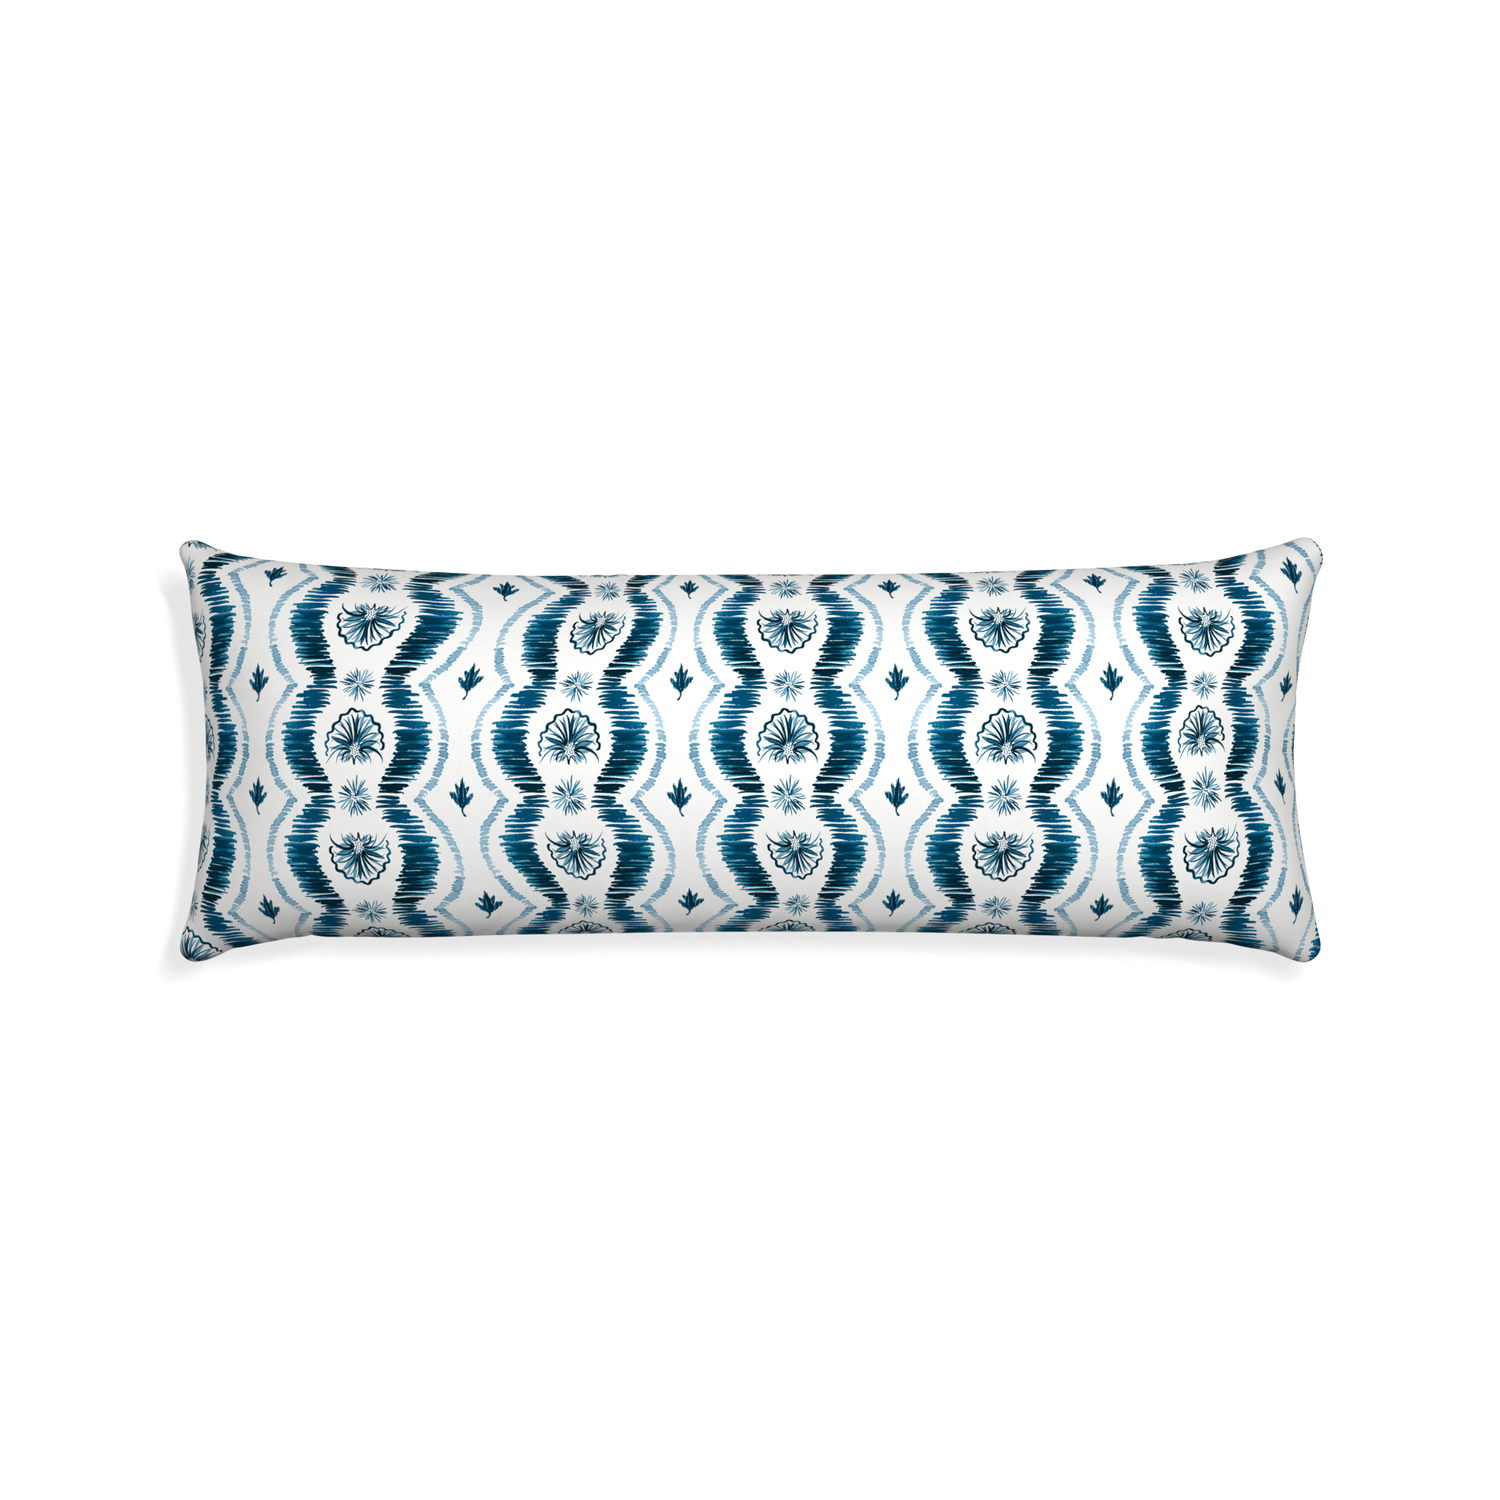 Xl-lumbar alice custom blue ikatpillow with none on white background